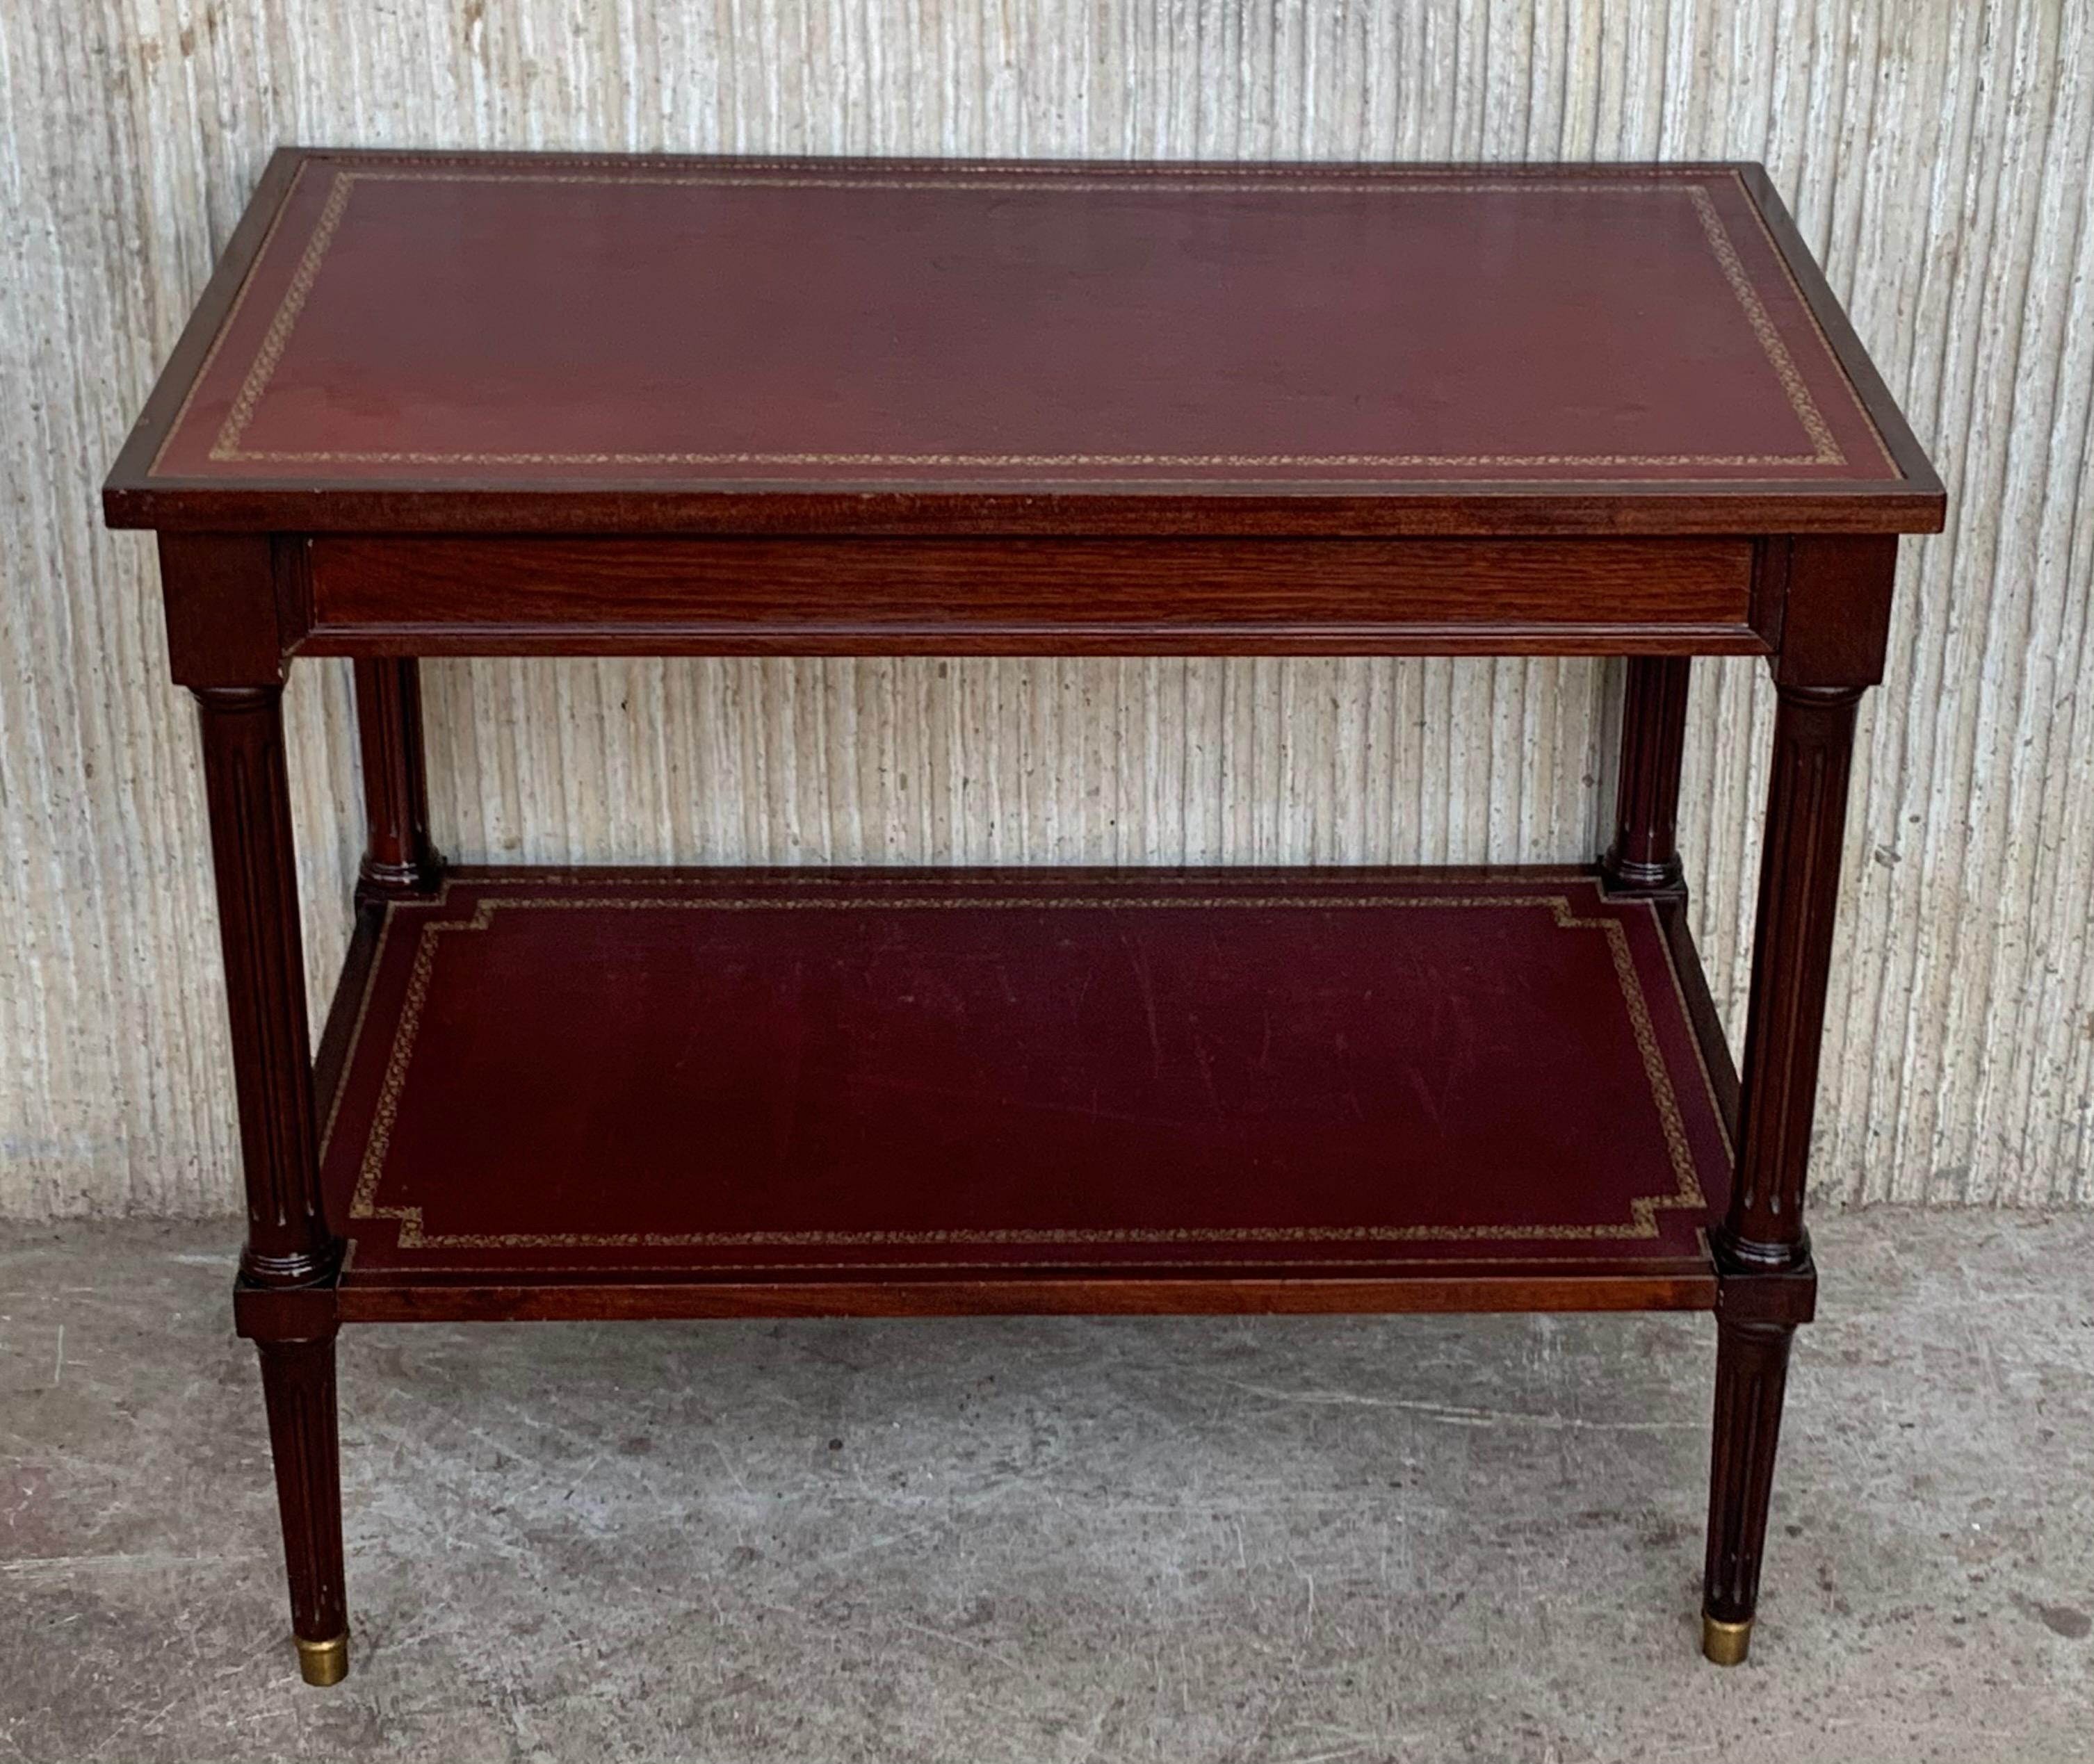 Two-tier red leather with gilt tooled top Empire end table in mahogany.